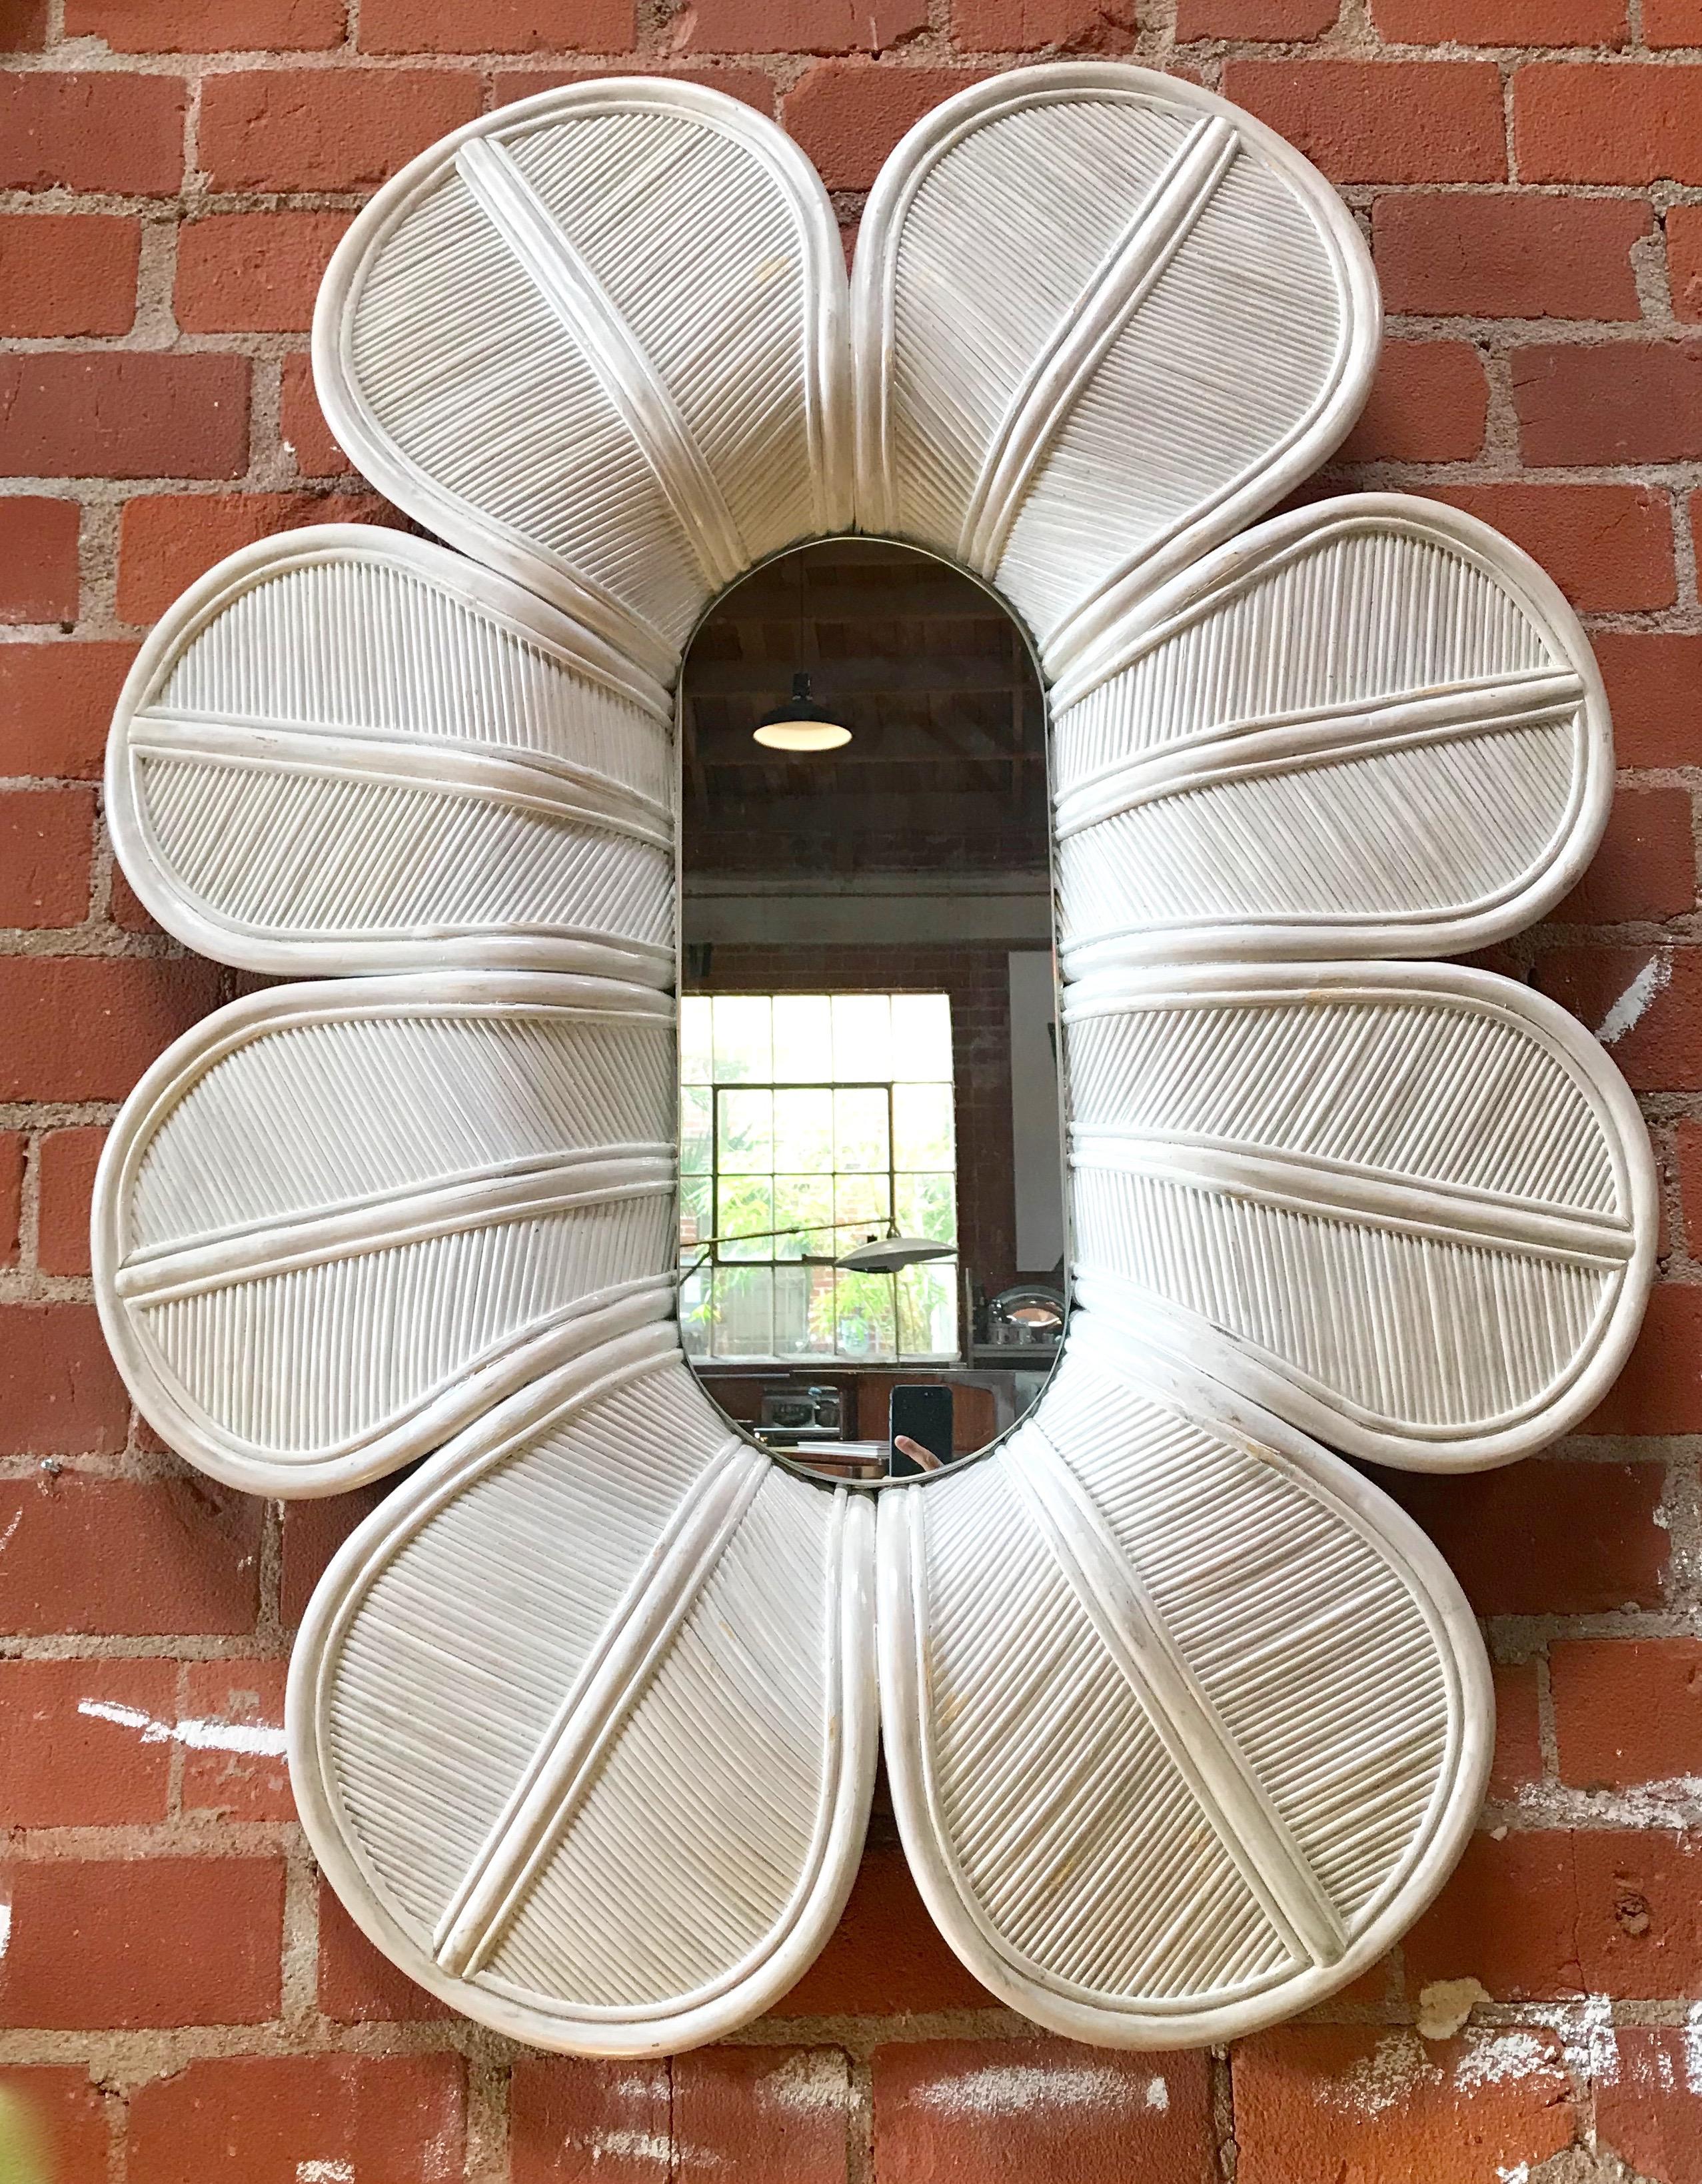 Giant flower wall mirror, Italy 1960s
Glamorous oversized midcentury bamboo wall mirror in the shape of a flower, circa 1960s. 
This sculptural artisan factory 